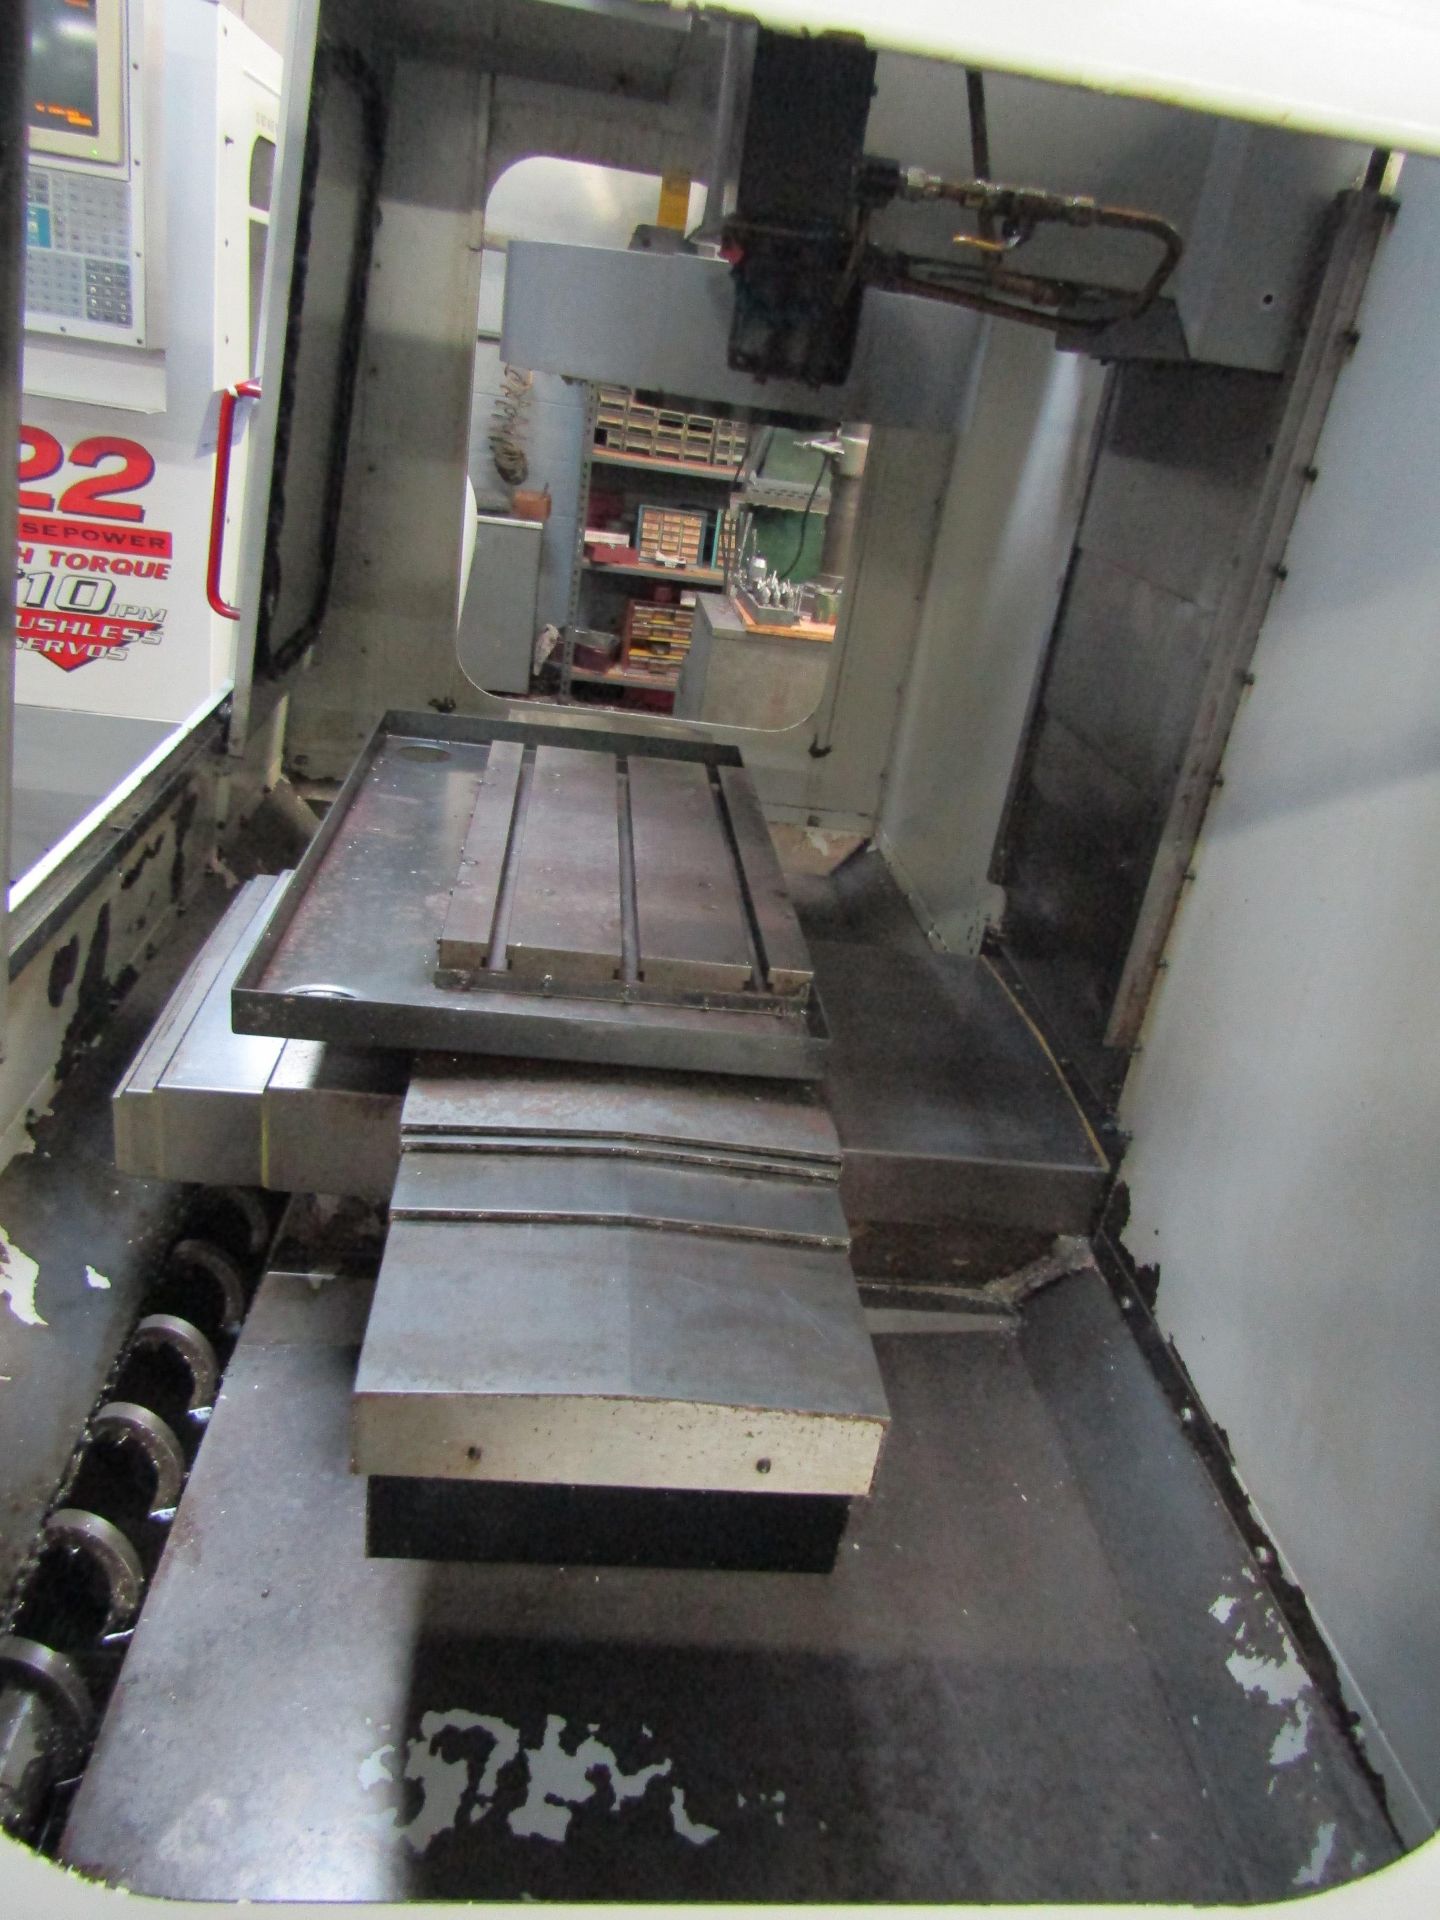 1997 HAAS VF-1 VERTICAL MACHINING CENTER TRAVELS: 20 X 16 X 20, HAAS CONTROL – SERIAL#: 12840 - Image 7 of 11